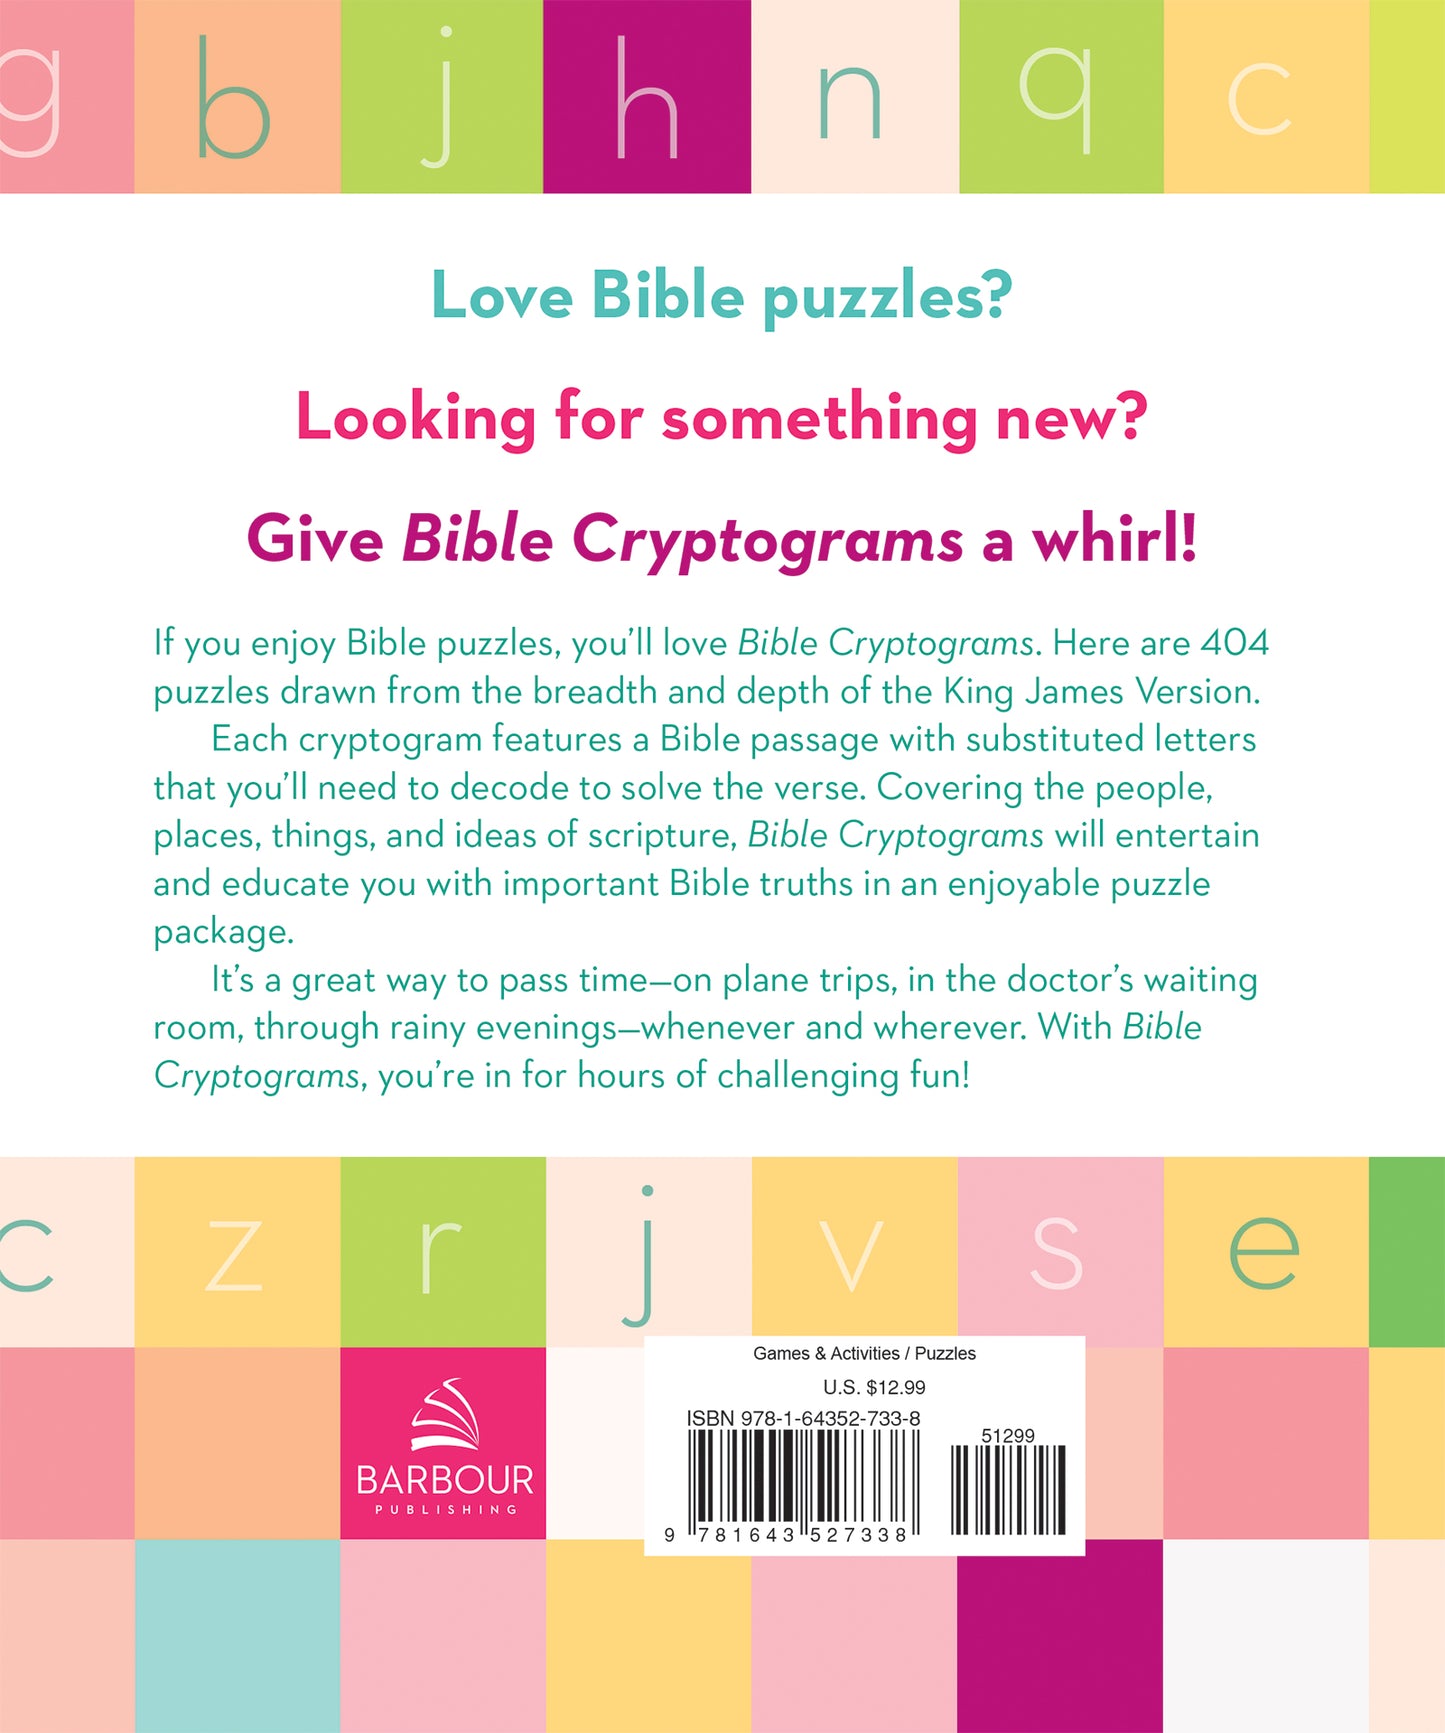 Bible Cryptograms - The Christian Gift Company